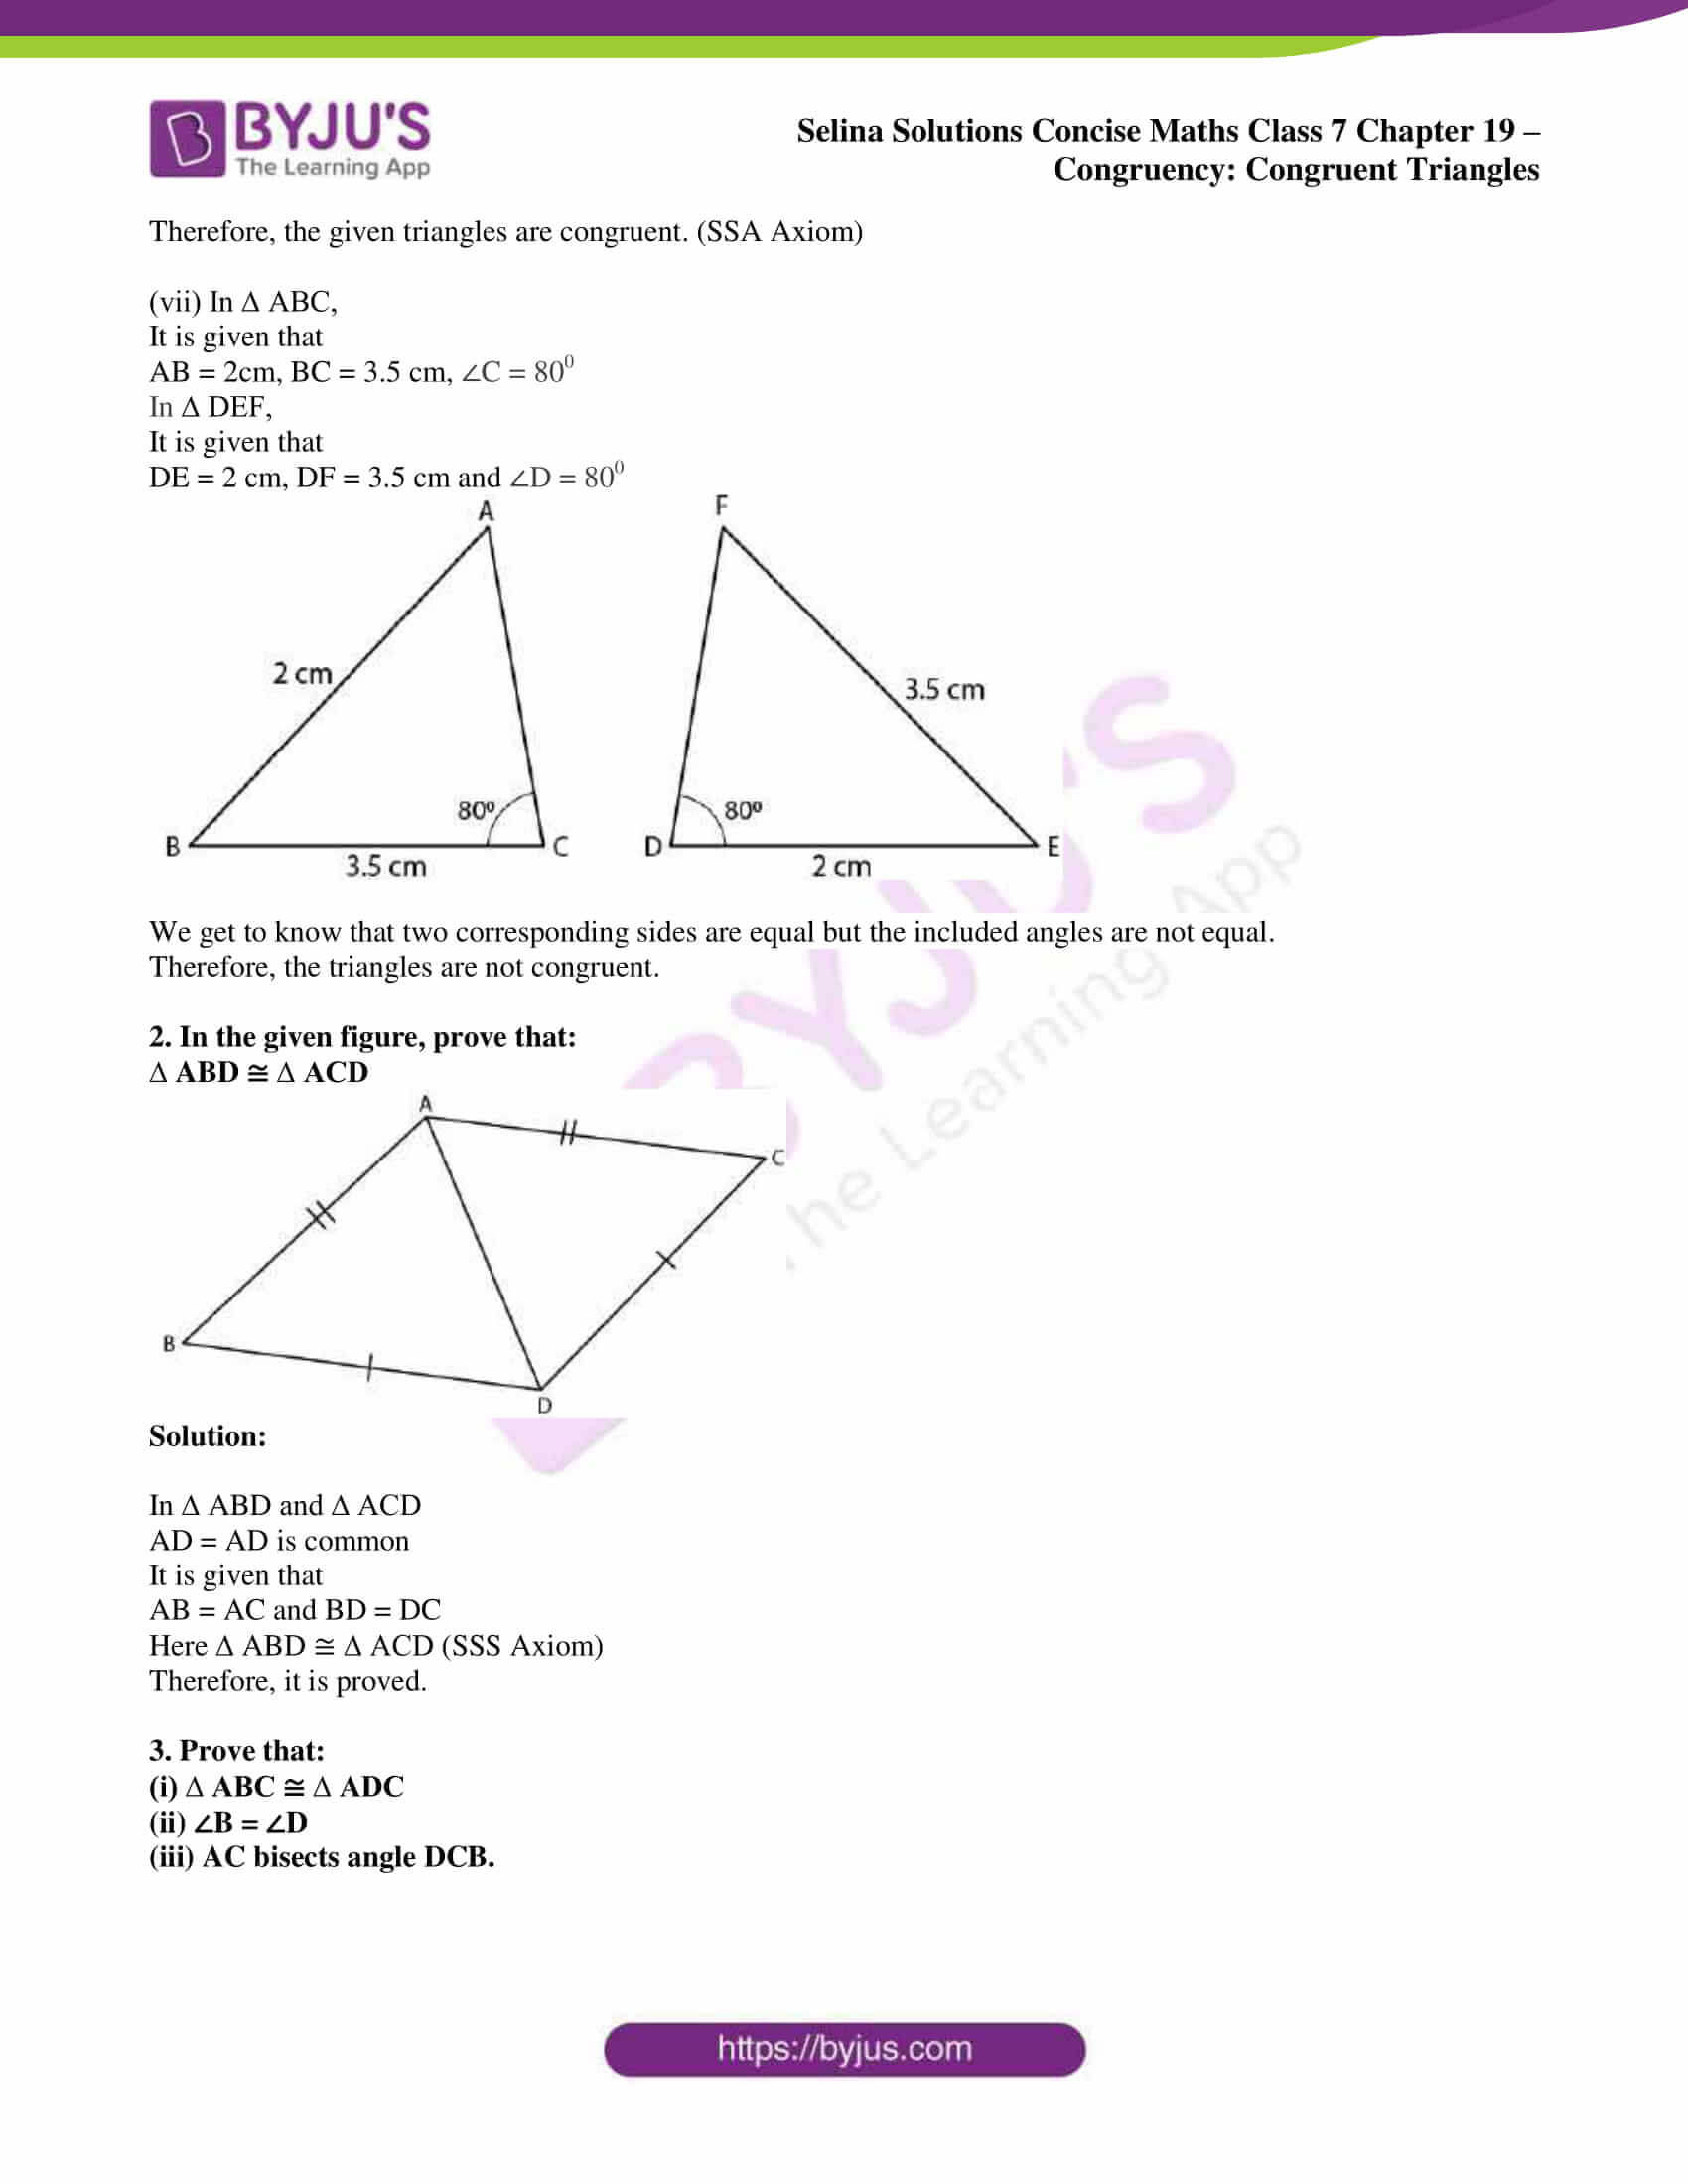 Selina Solutions Concise Maths Class 7 Chapter 19 Congruency Congruent